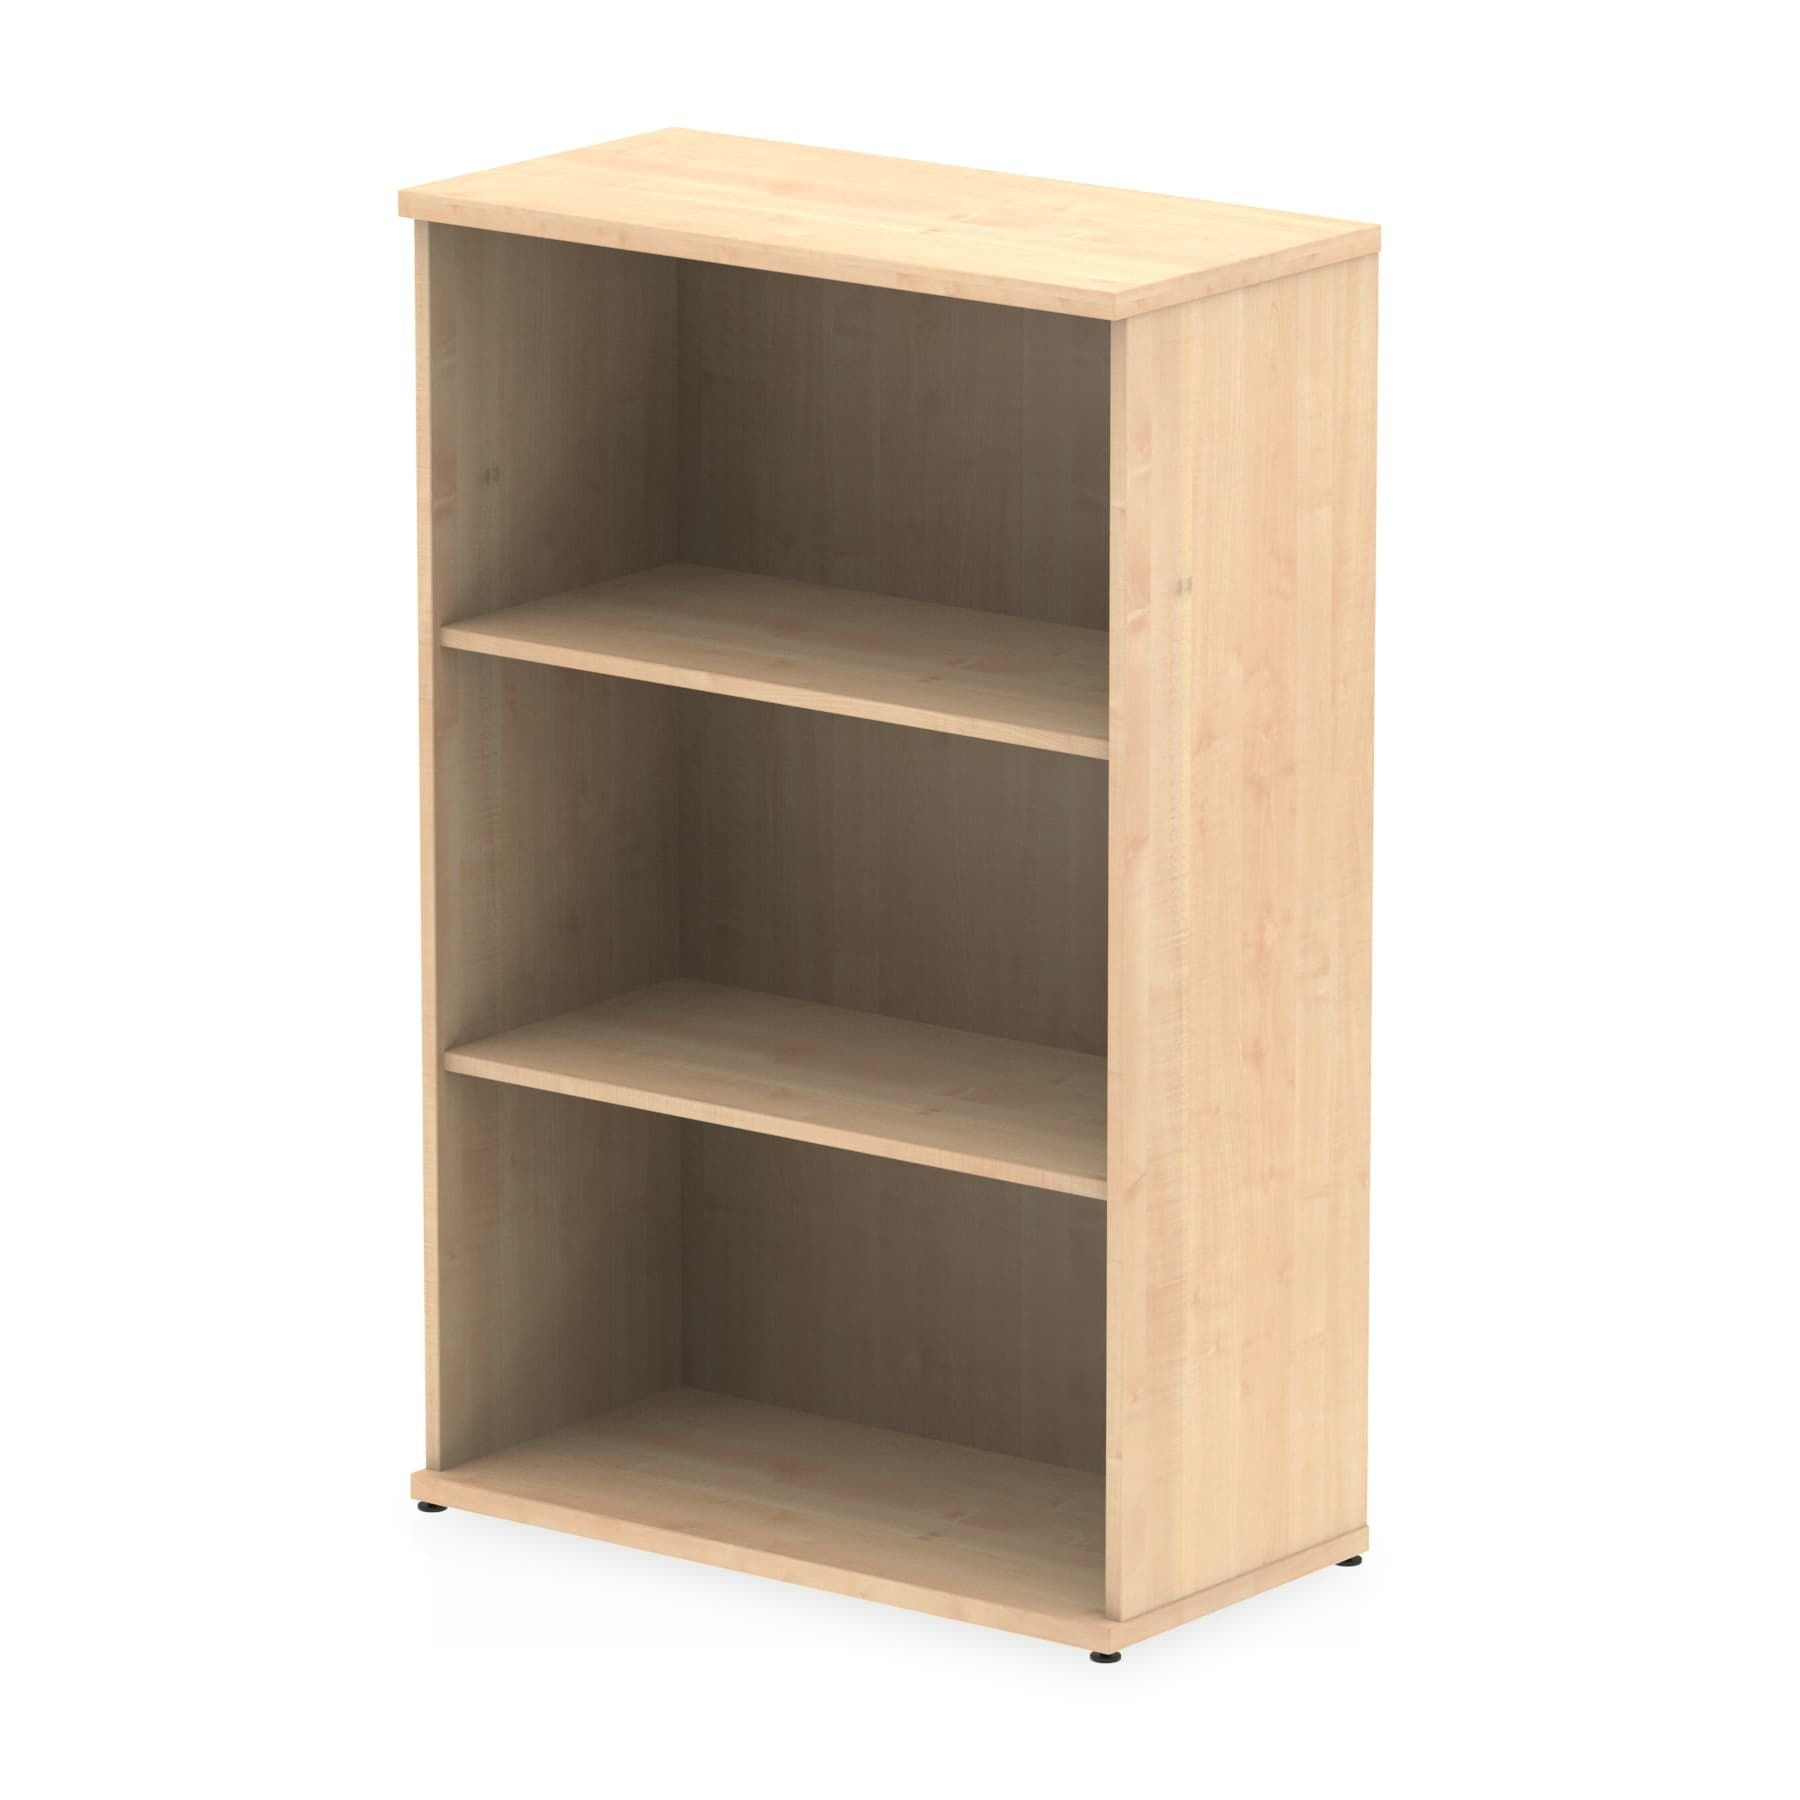 Impulse MFC Bookcase - Self-Assembly, Adjustable Shelves, 4 Sizes (800x400x800/1200/1600/2000mm) - 5-Year Guarantee